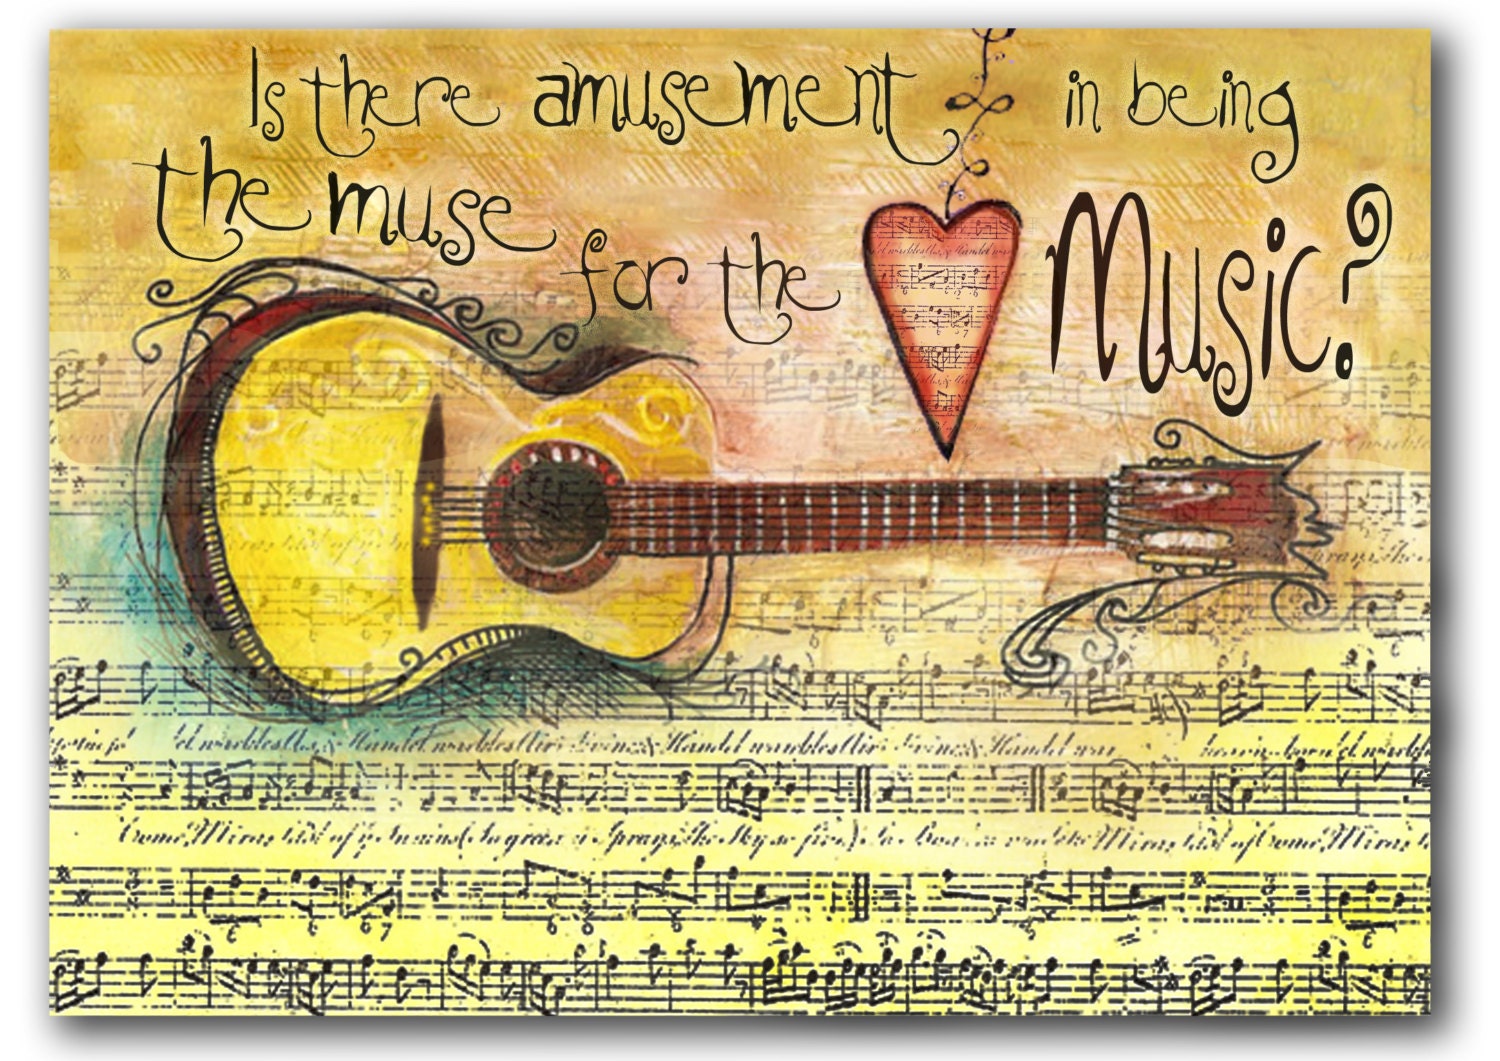 5 X 7 Guitar Muse for the Music -  Giclee Print in Colors of Yellow, Tan and Brown - christinafajardoart